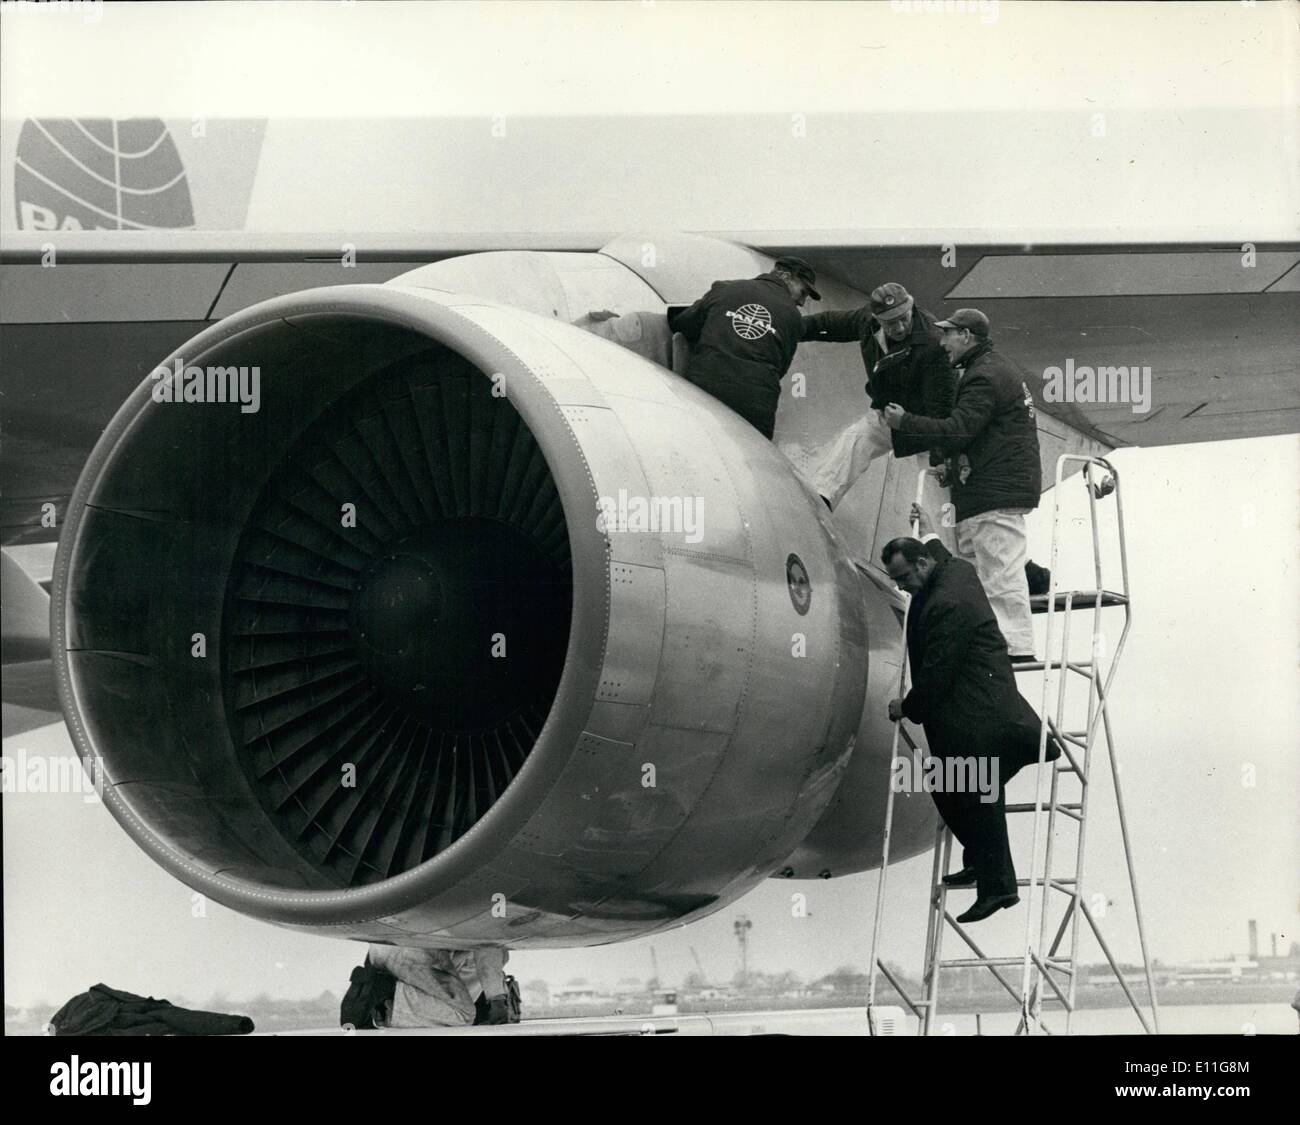 Jan. 01, 1978 - Jumbo jet arrives at heath-row Pan American's 350 ton Boeing 747 jumbo jet the world's biggest airliner made its first flight to heath-row airport yesterday. photo shows Technicians examining one of the Jumbo jet's Pratt and Whitney engines, which failed to start on its first demonstration flight from heath-row. It took more than two hours to get the engine running. Stock Photo